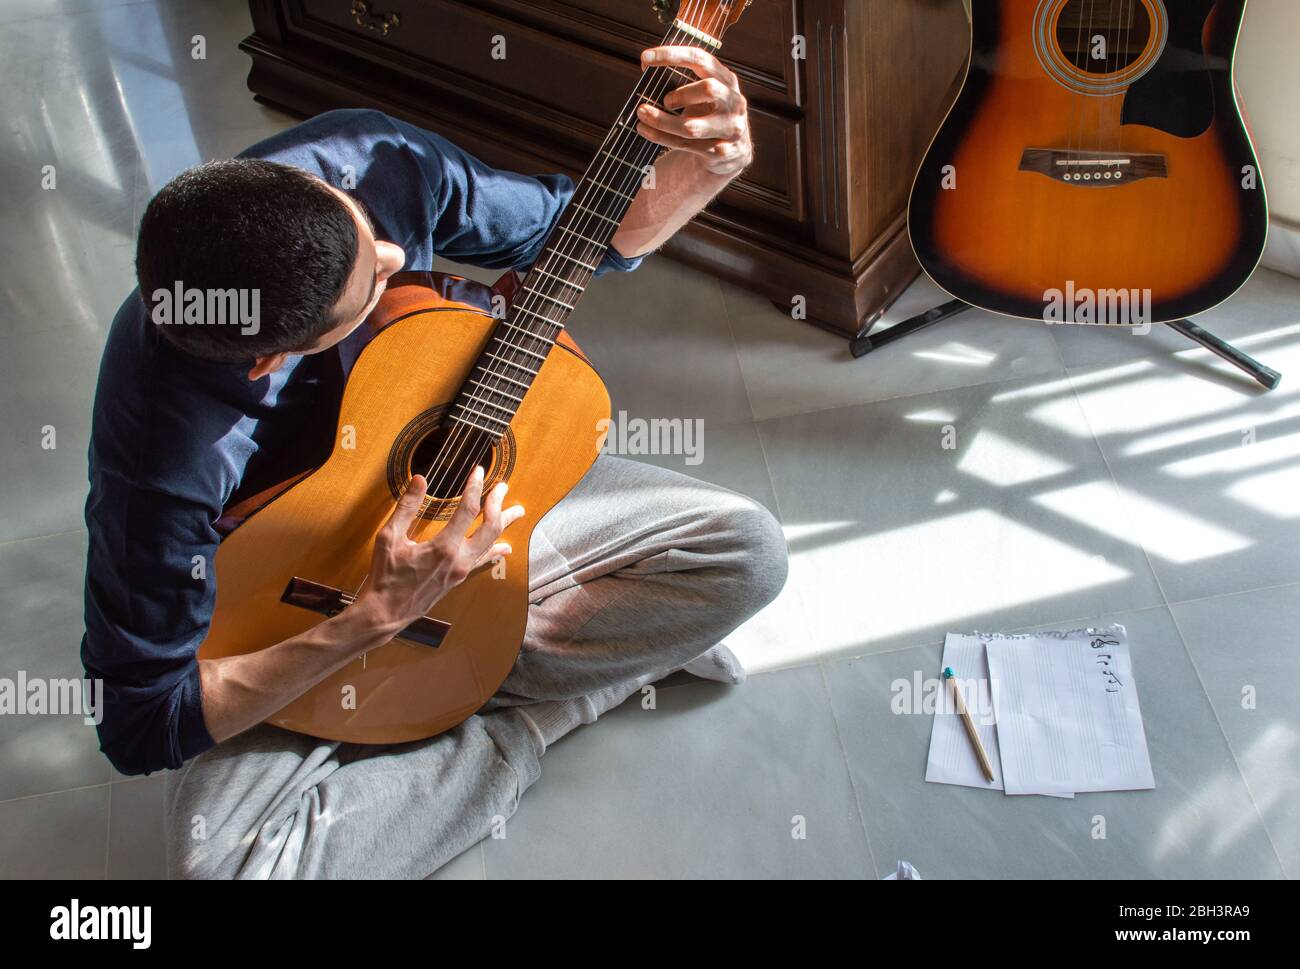 Author A Stock Photos Author A Stock Images Page 3 Alamy Images, Photos, Reviews